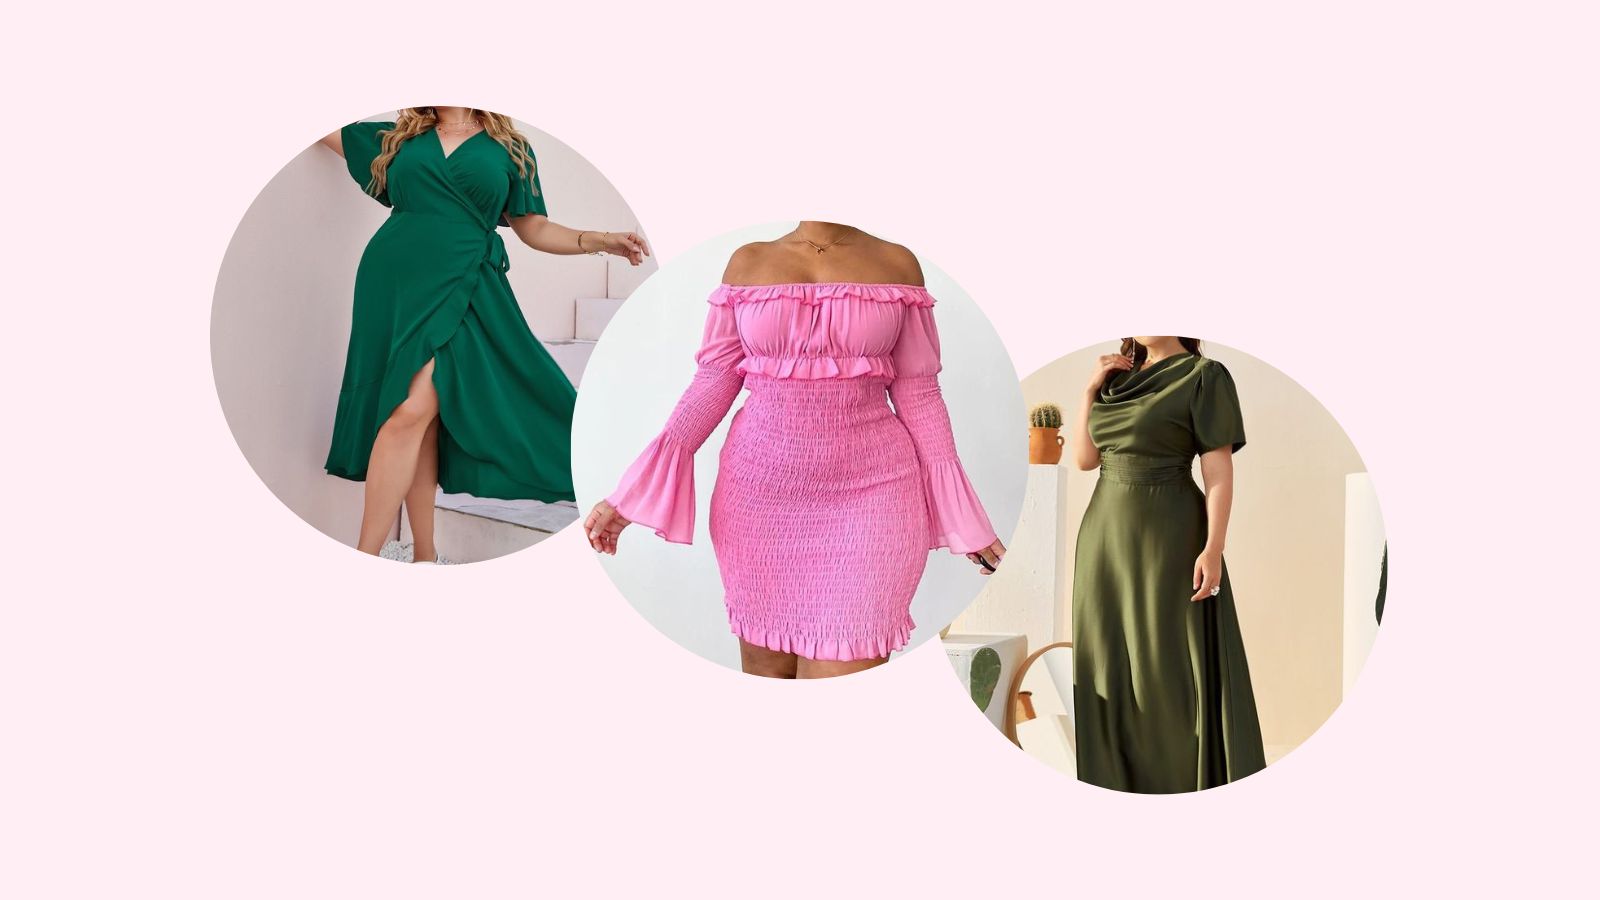 6 flattering dress designs for women with large busts that don't